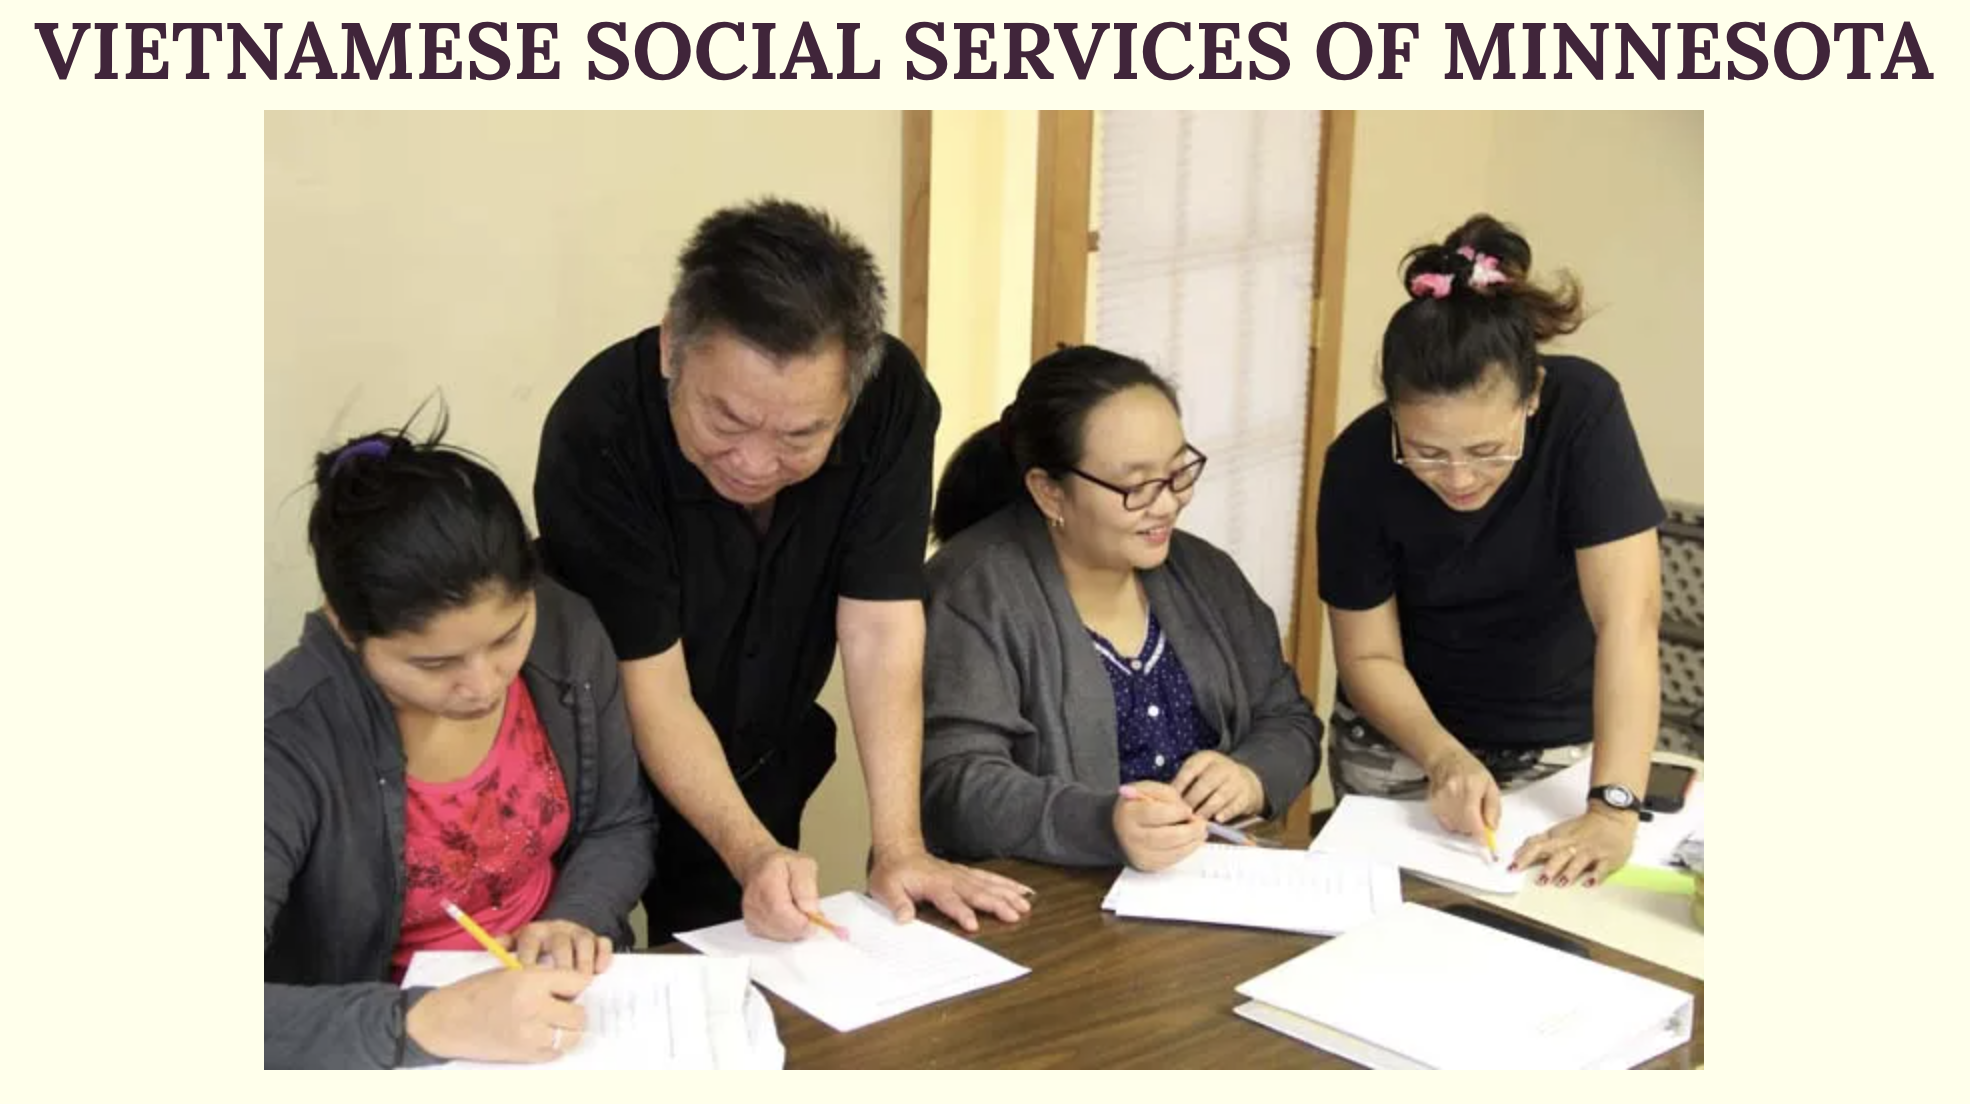 Photo from Vietnamese Social Services website, 4 people learning in a classroom.